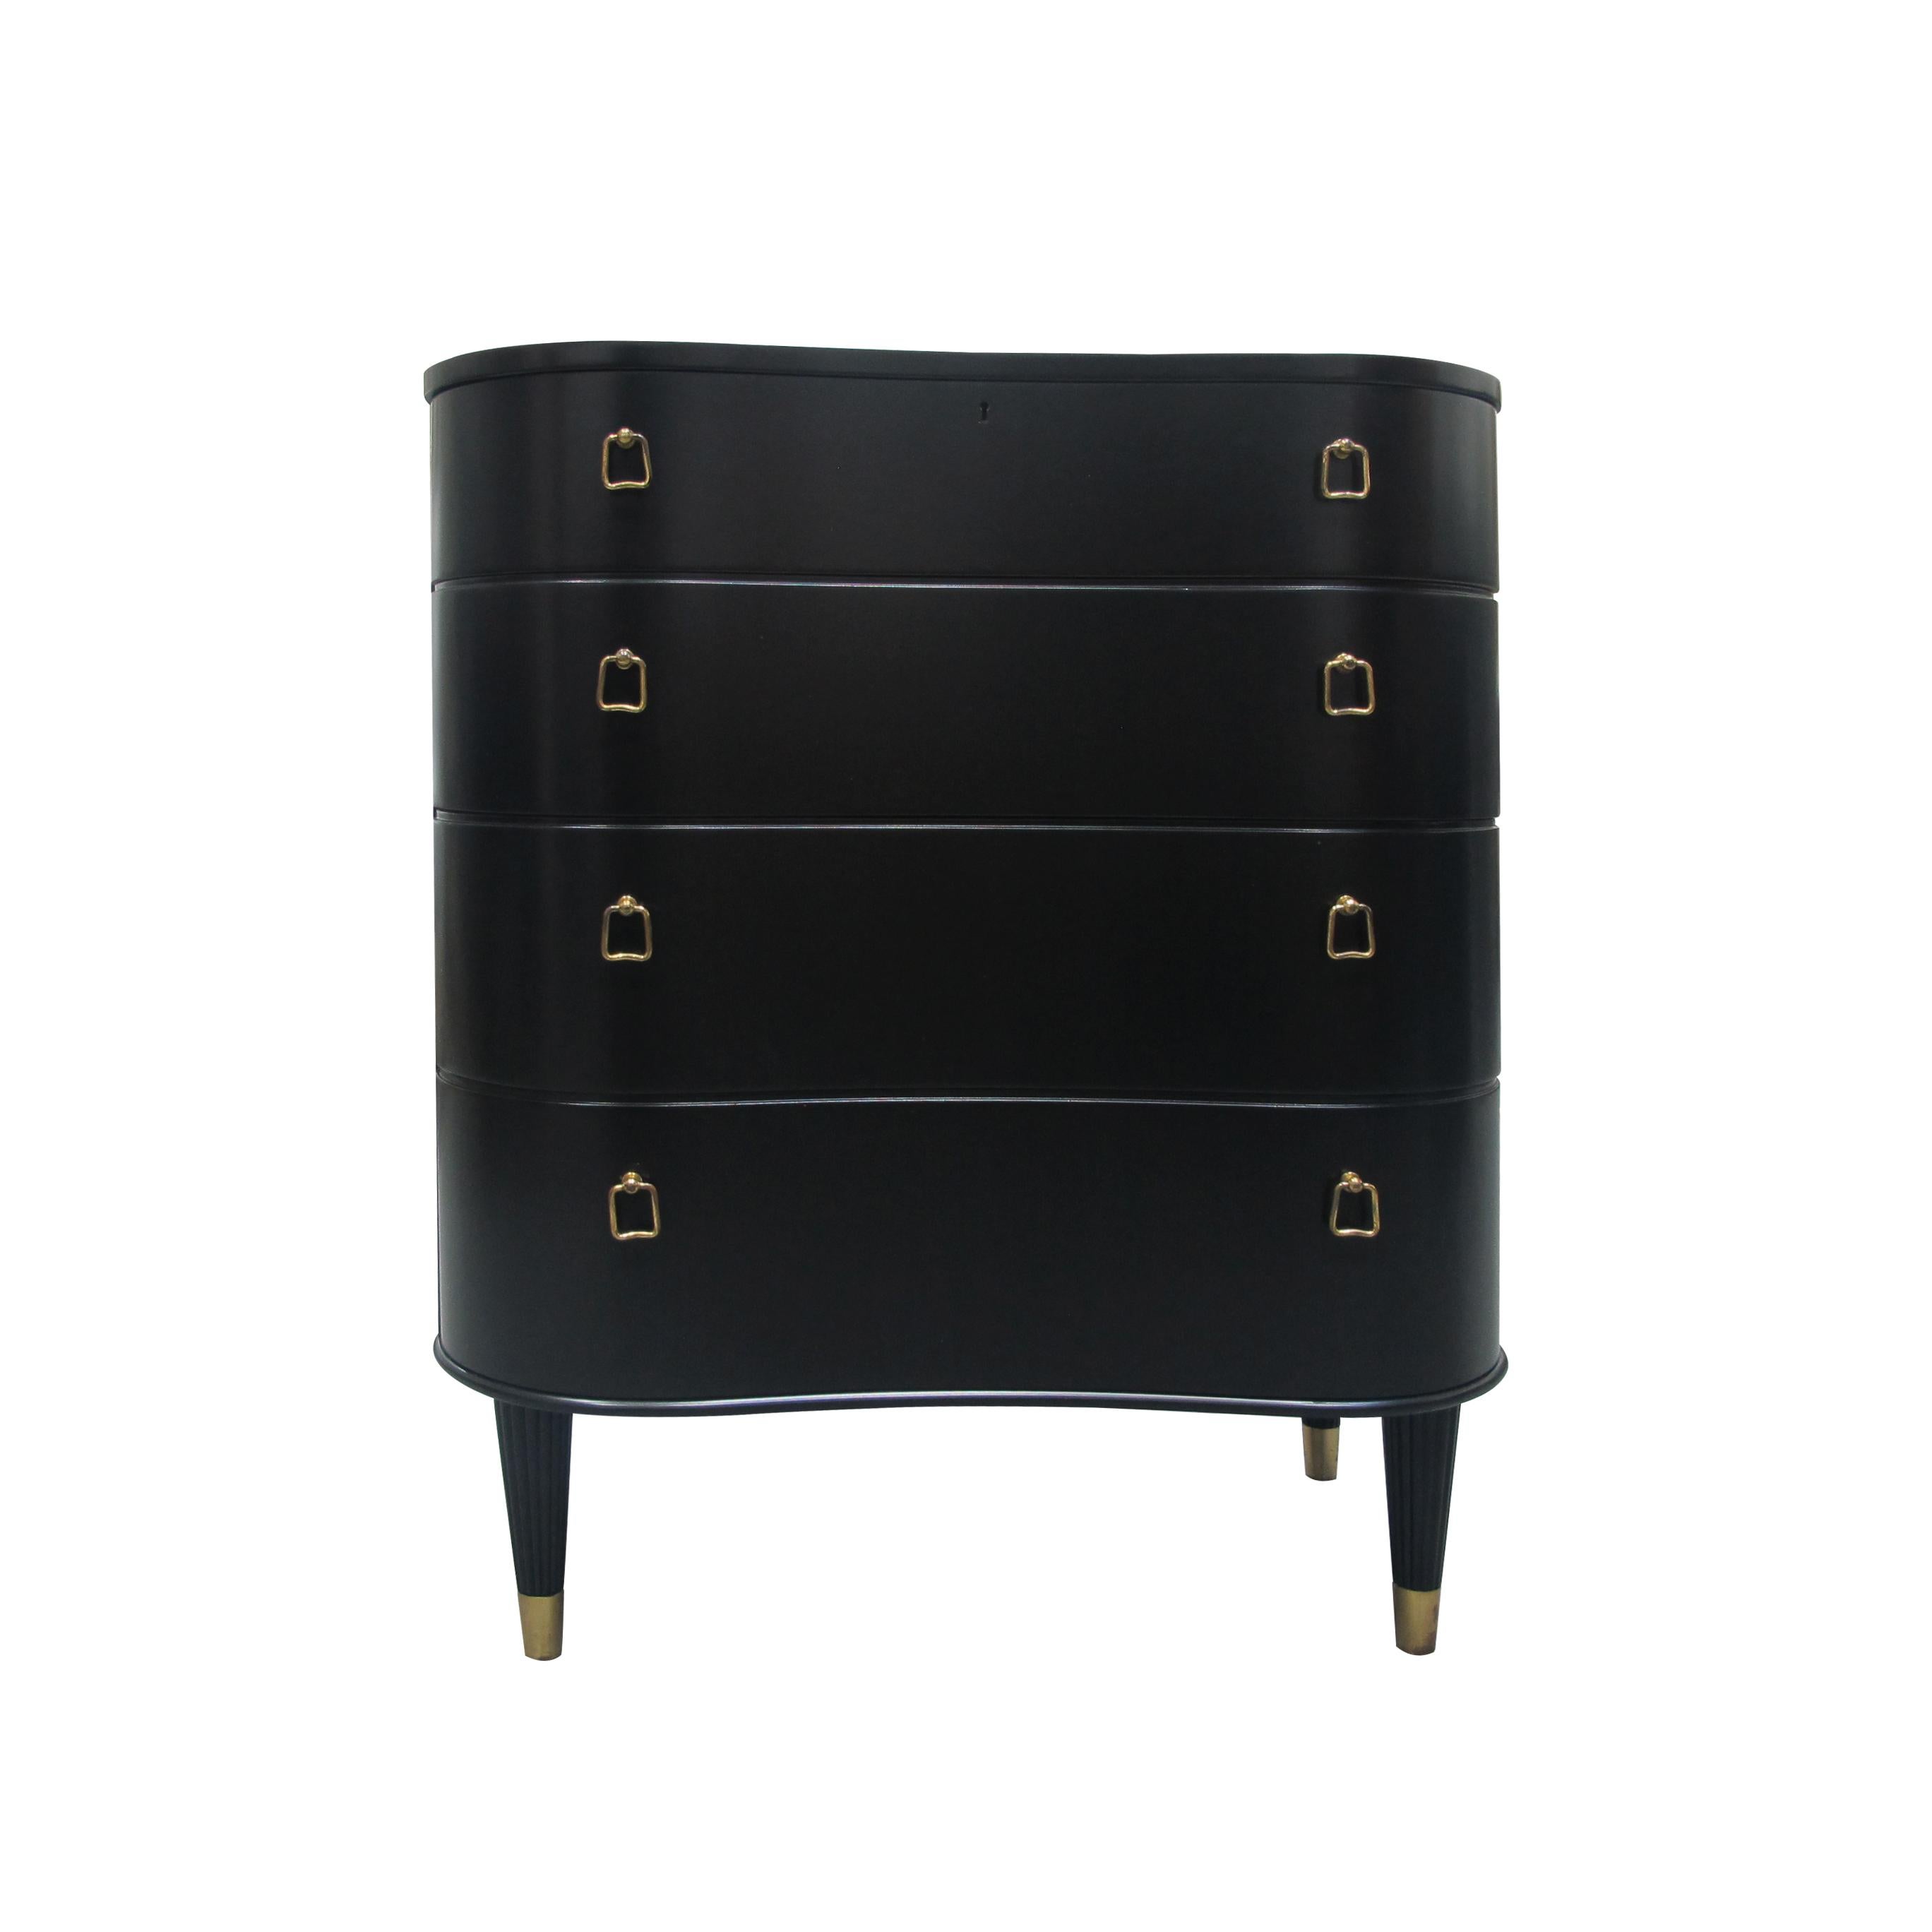 Painted 1940s Swedish Curved Fronted Chest of Drawers with Four Drawers & Brass Handles